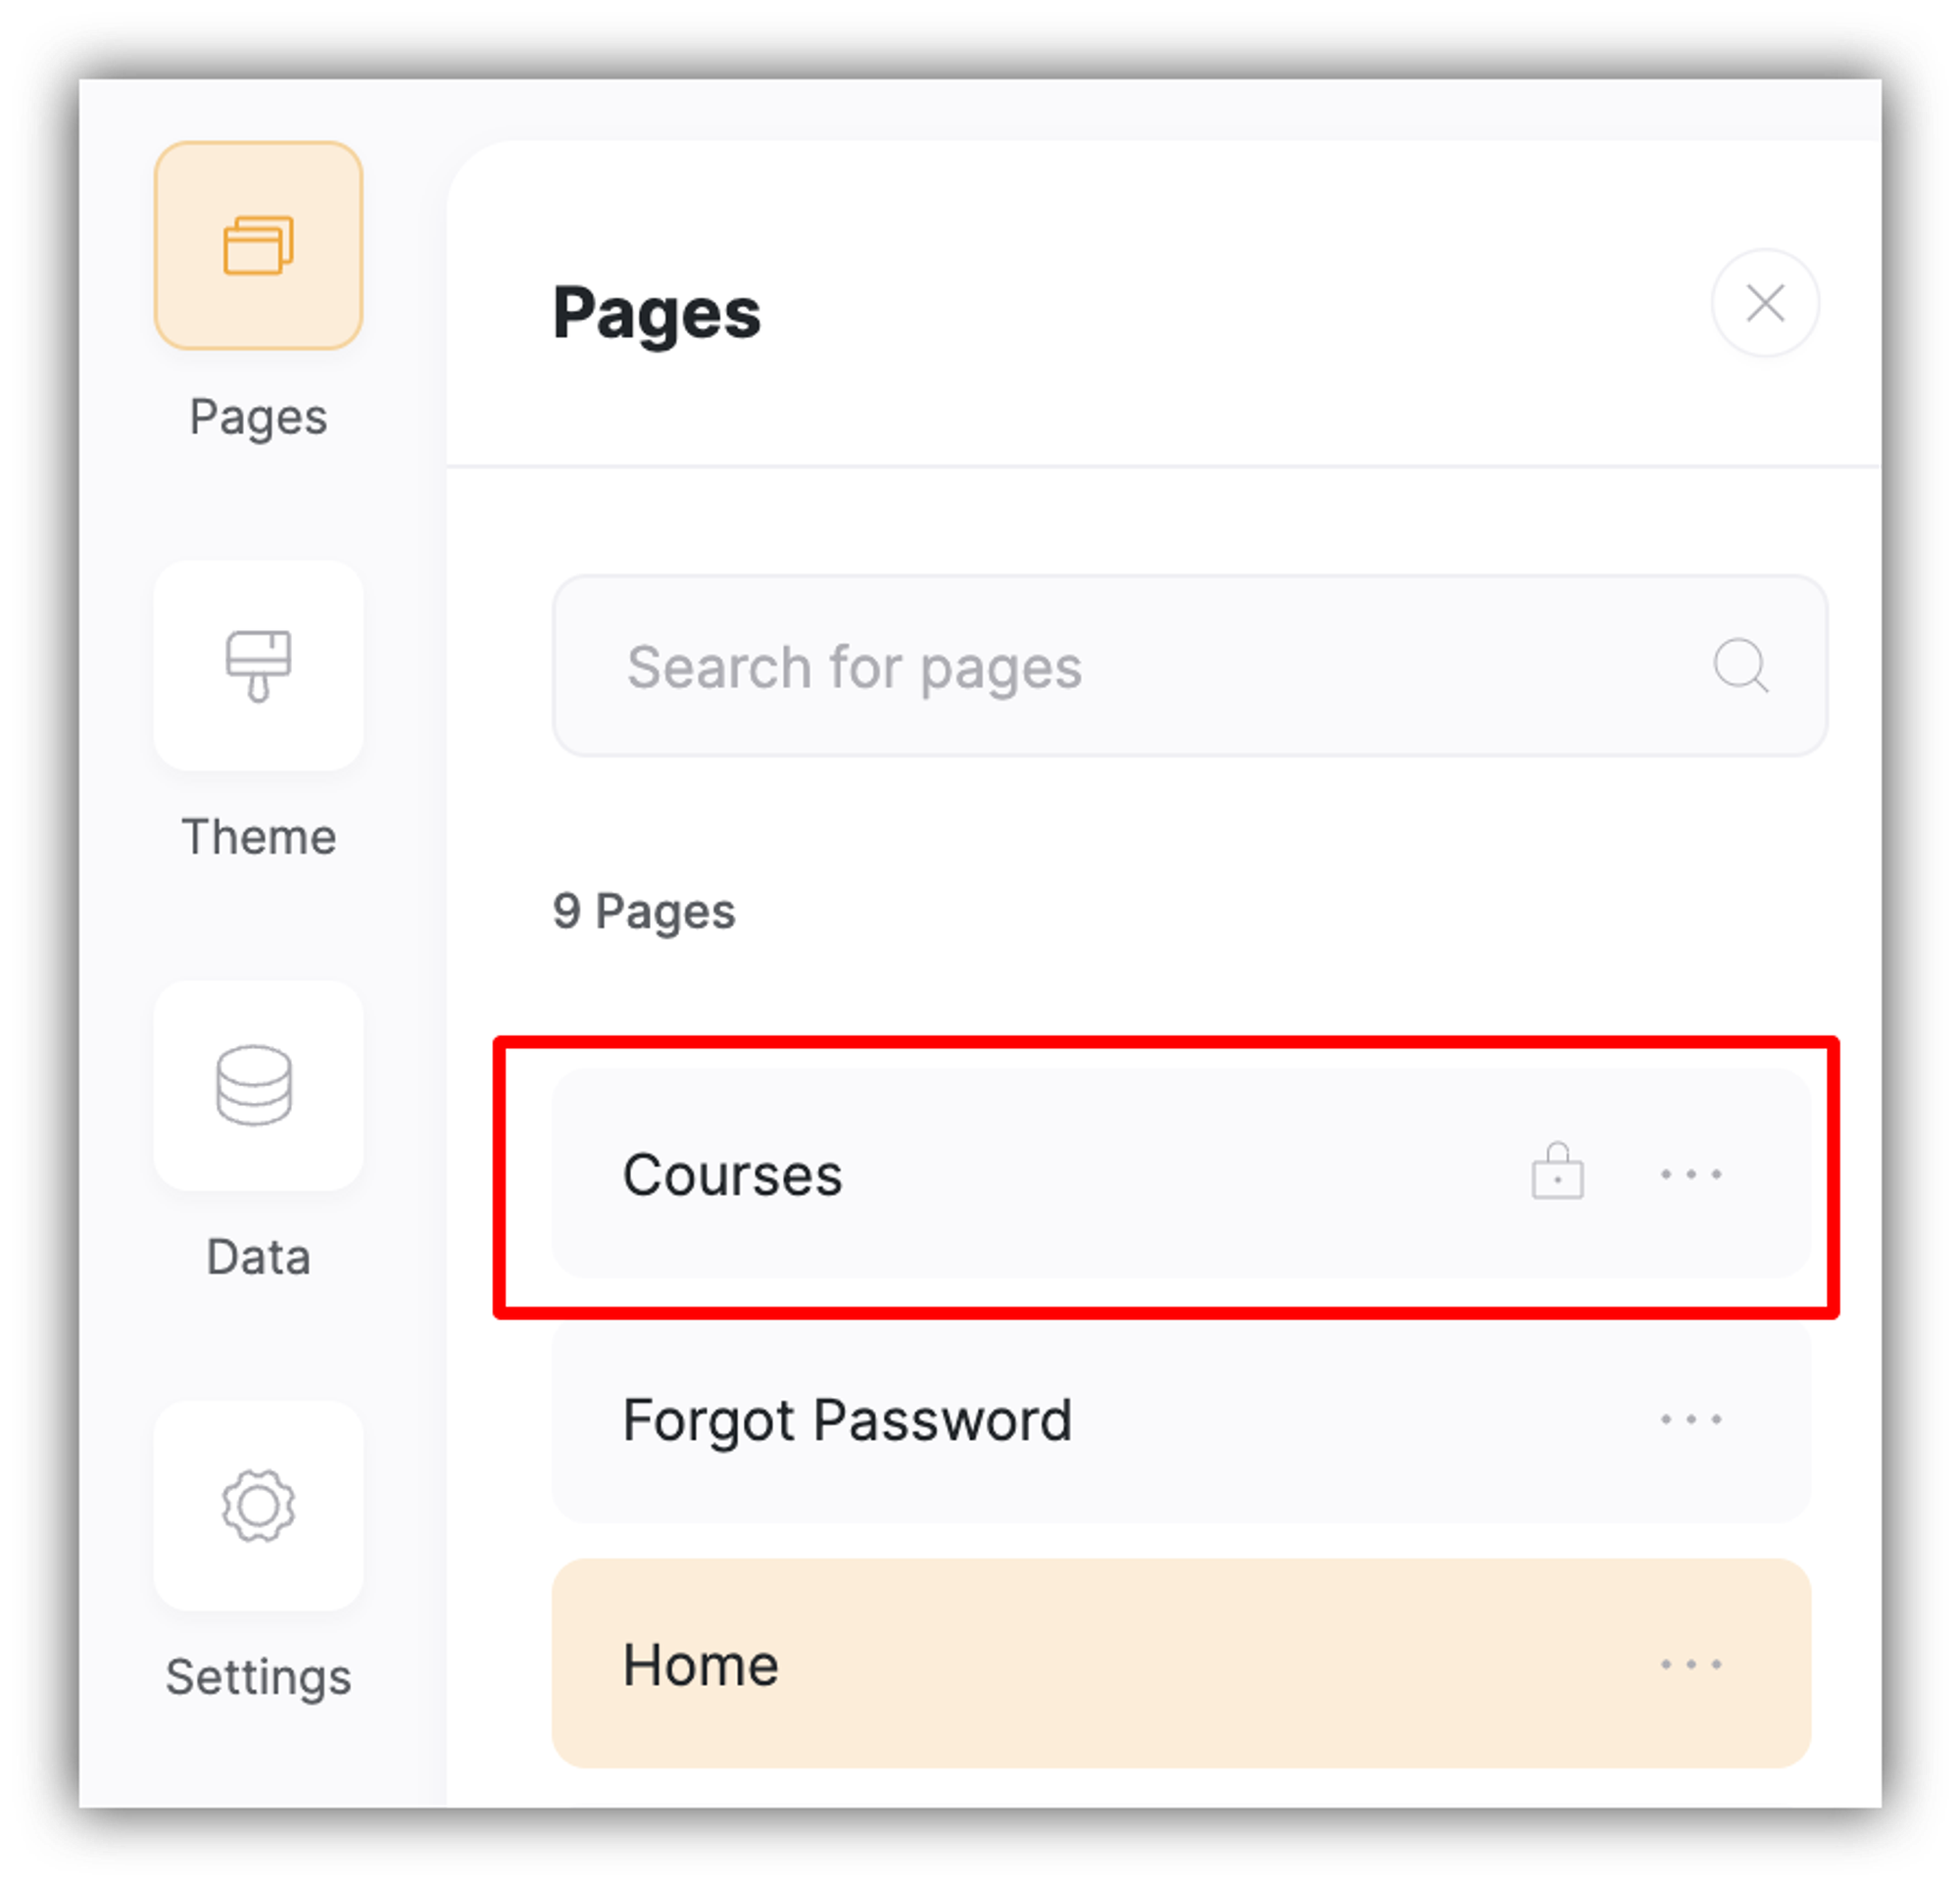 Separate page for courses created